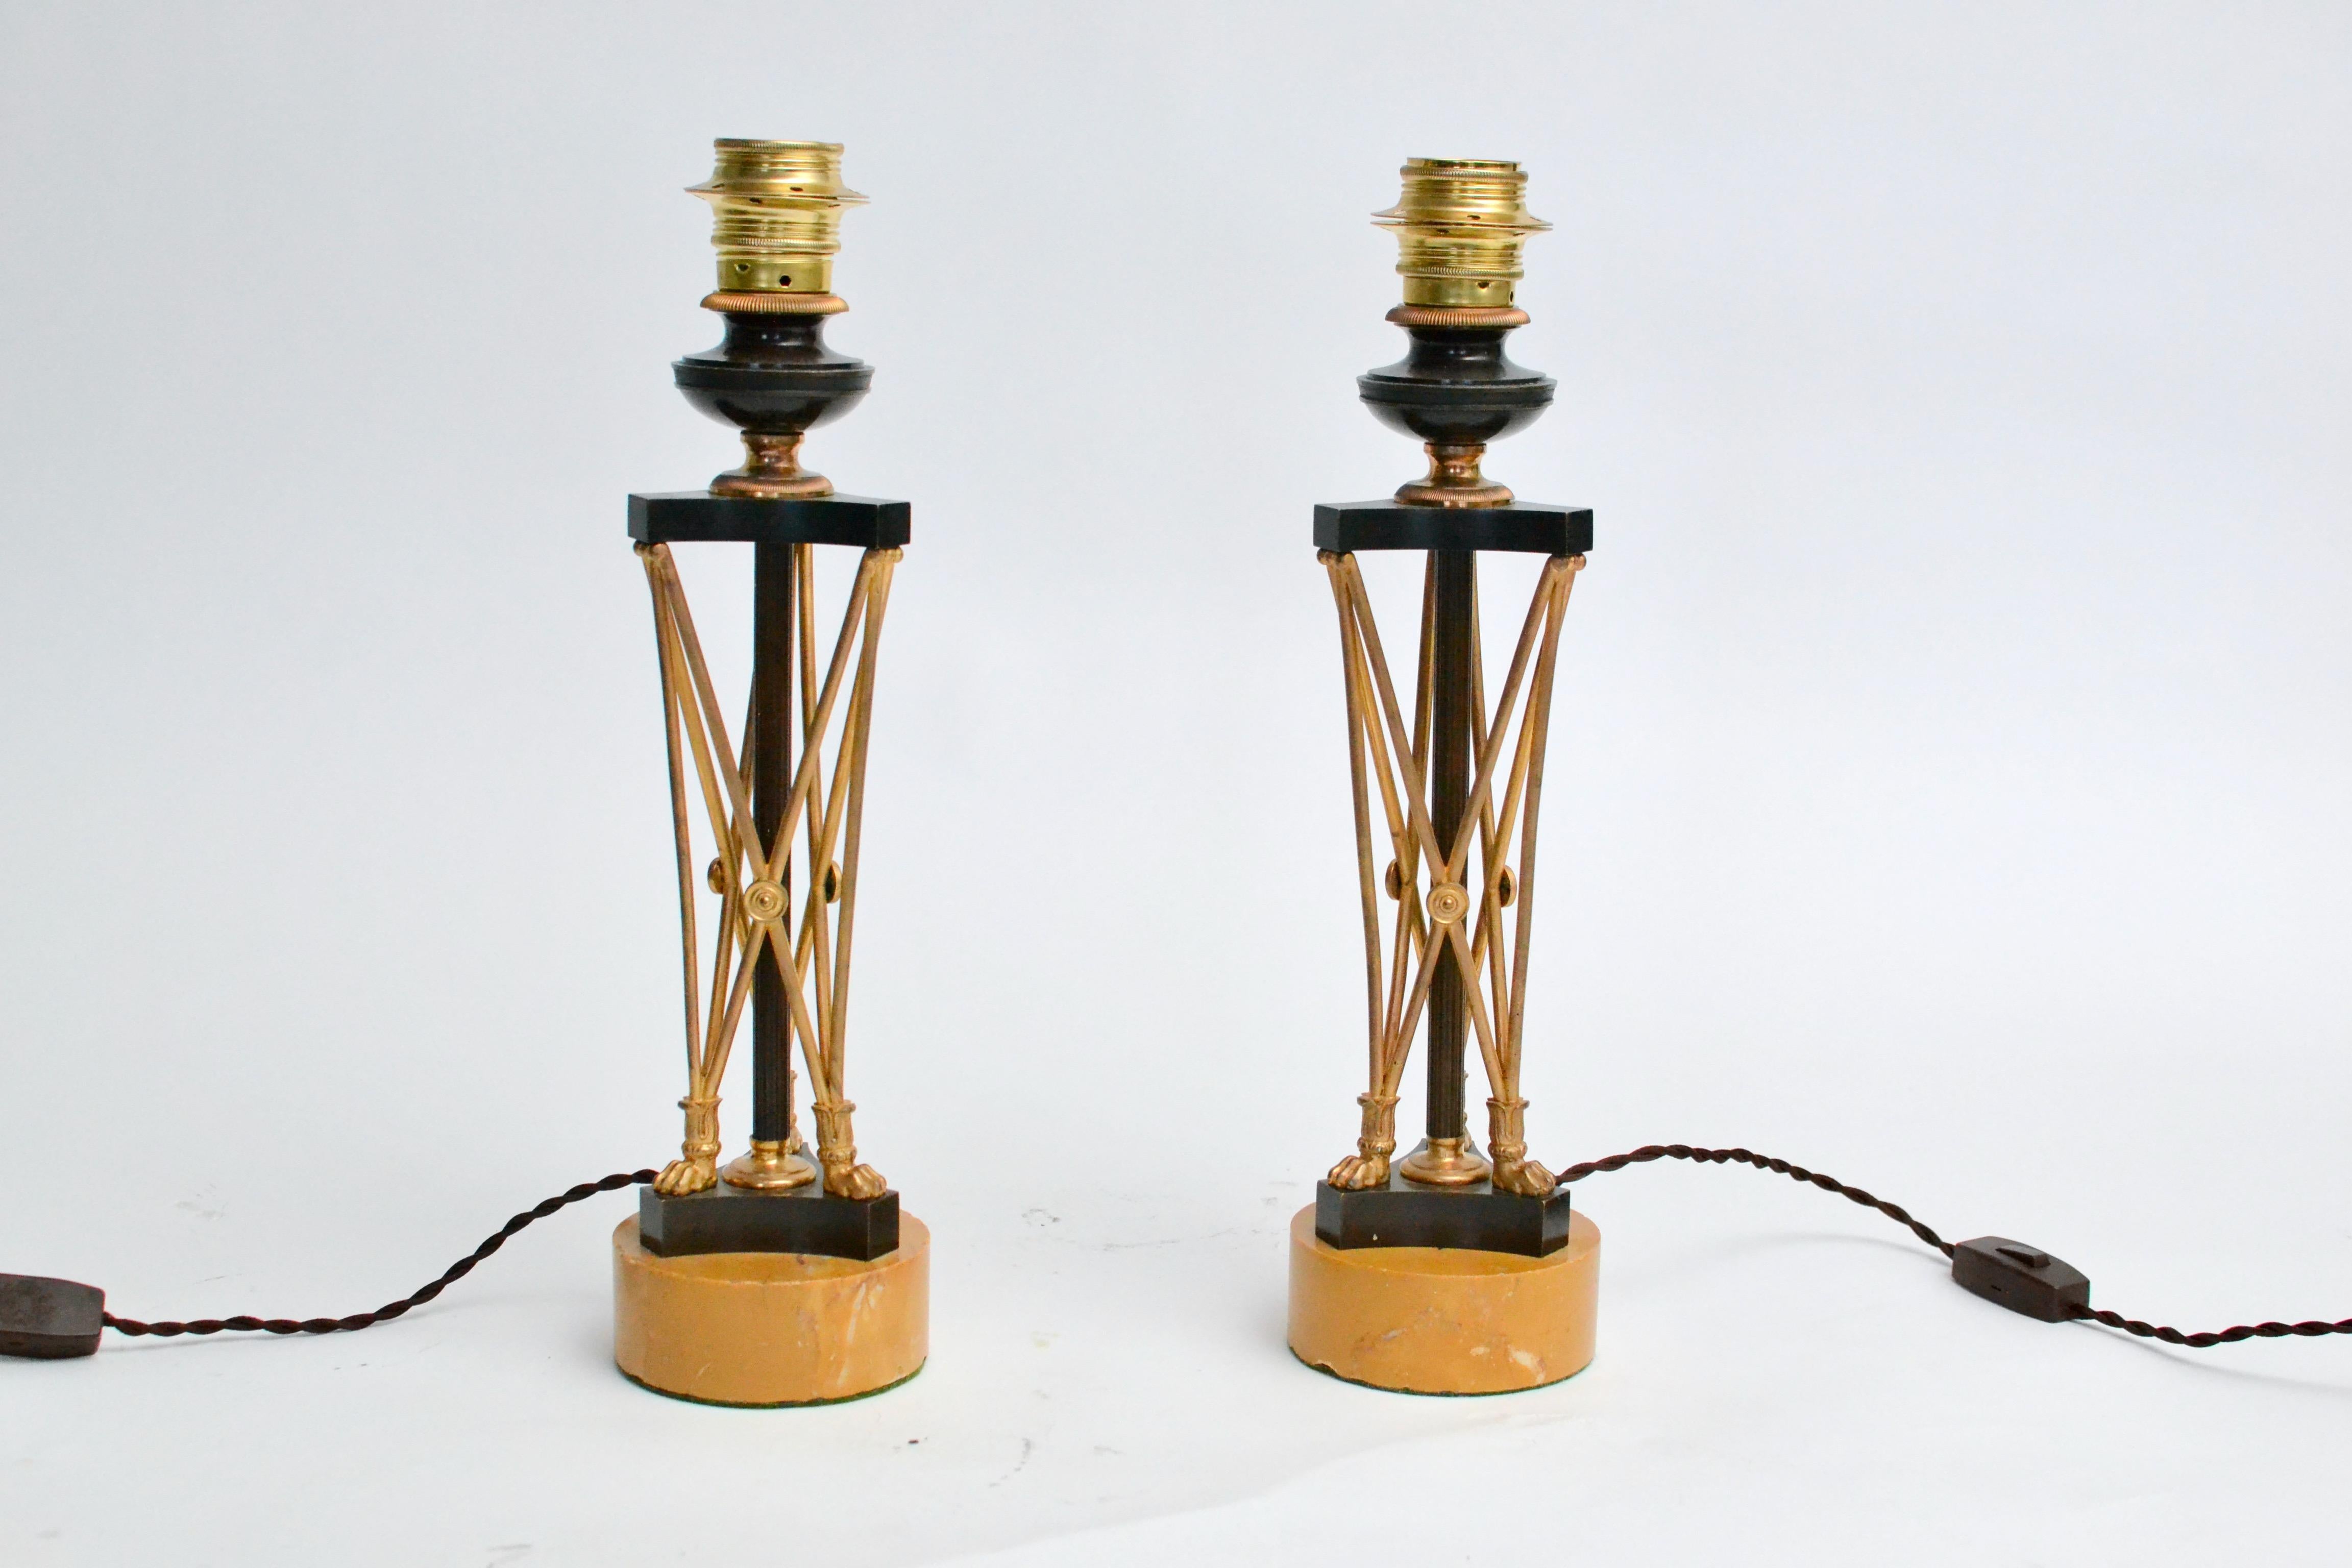 19th Century Pair of Regency Gilt and Patinated Bronze Candlesticks, Mounted as Lamps. For Sale